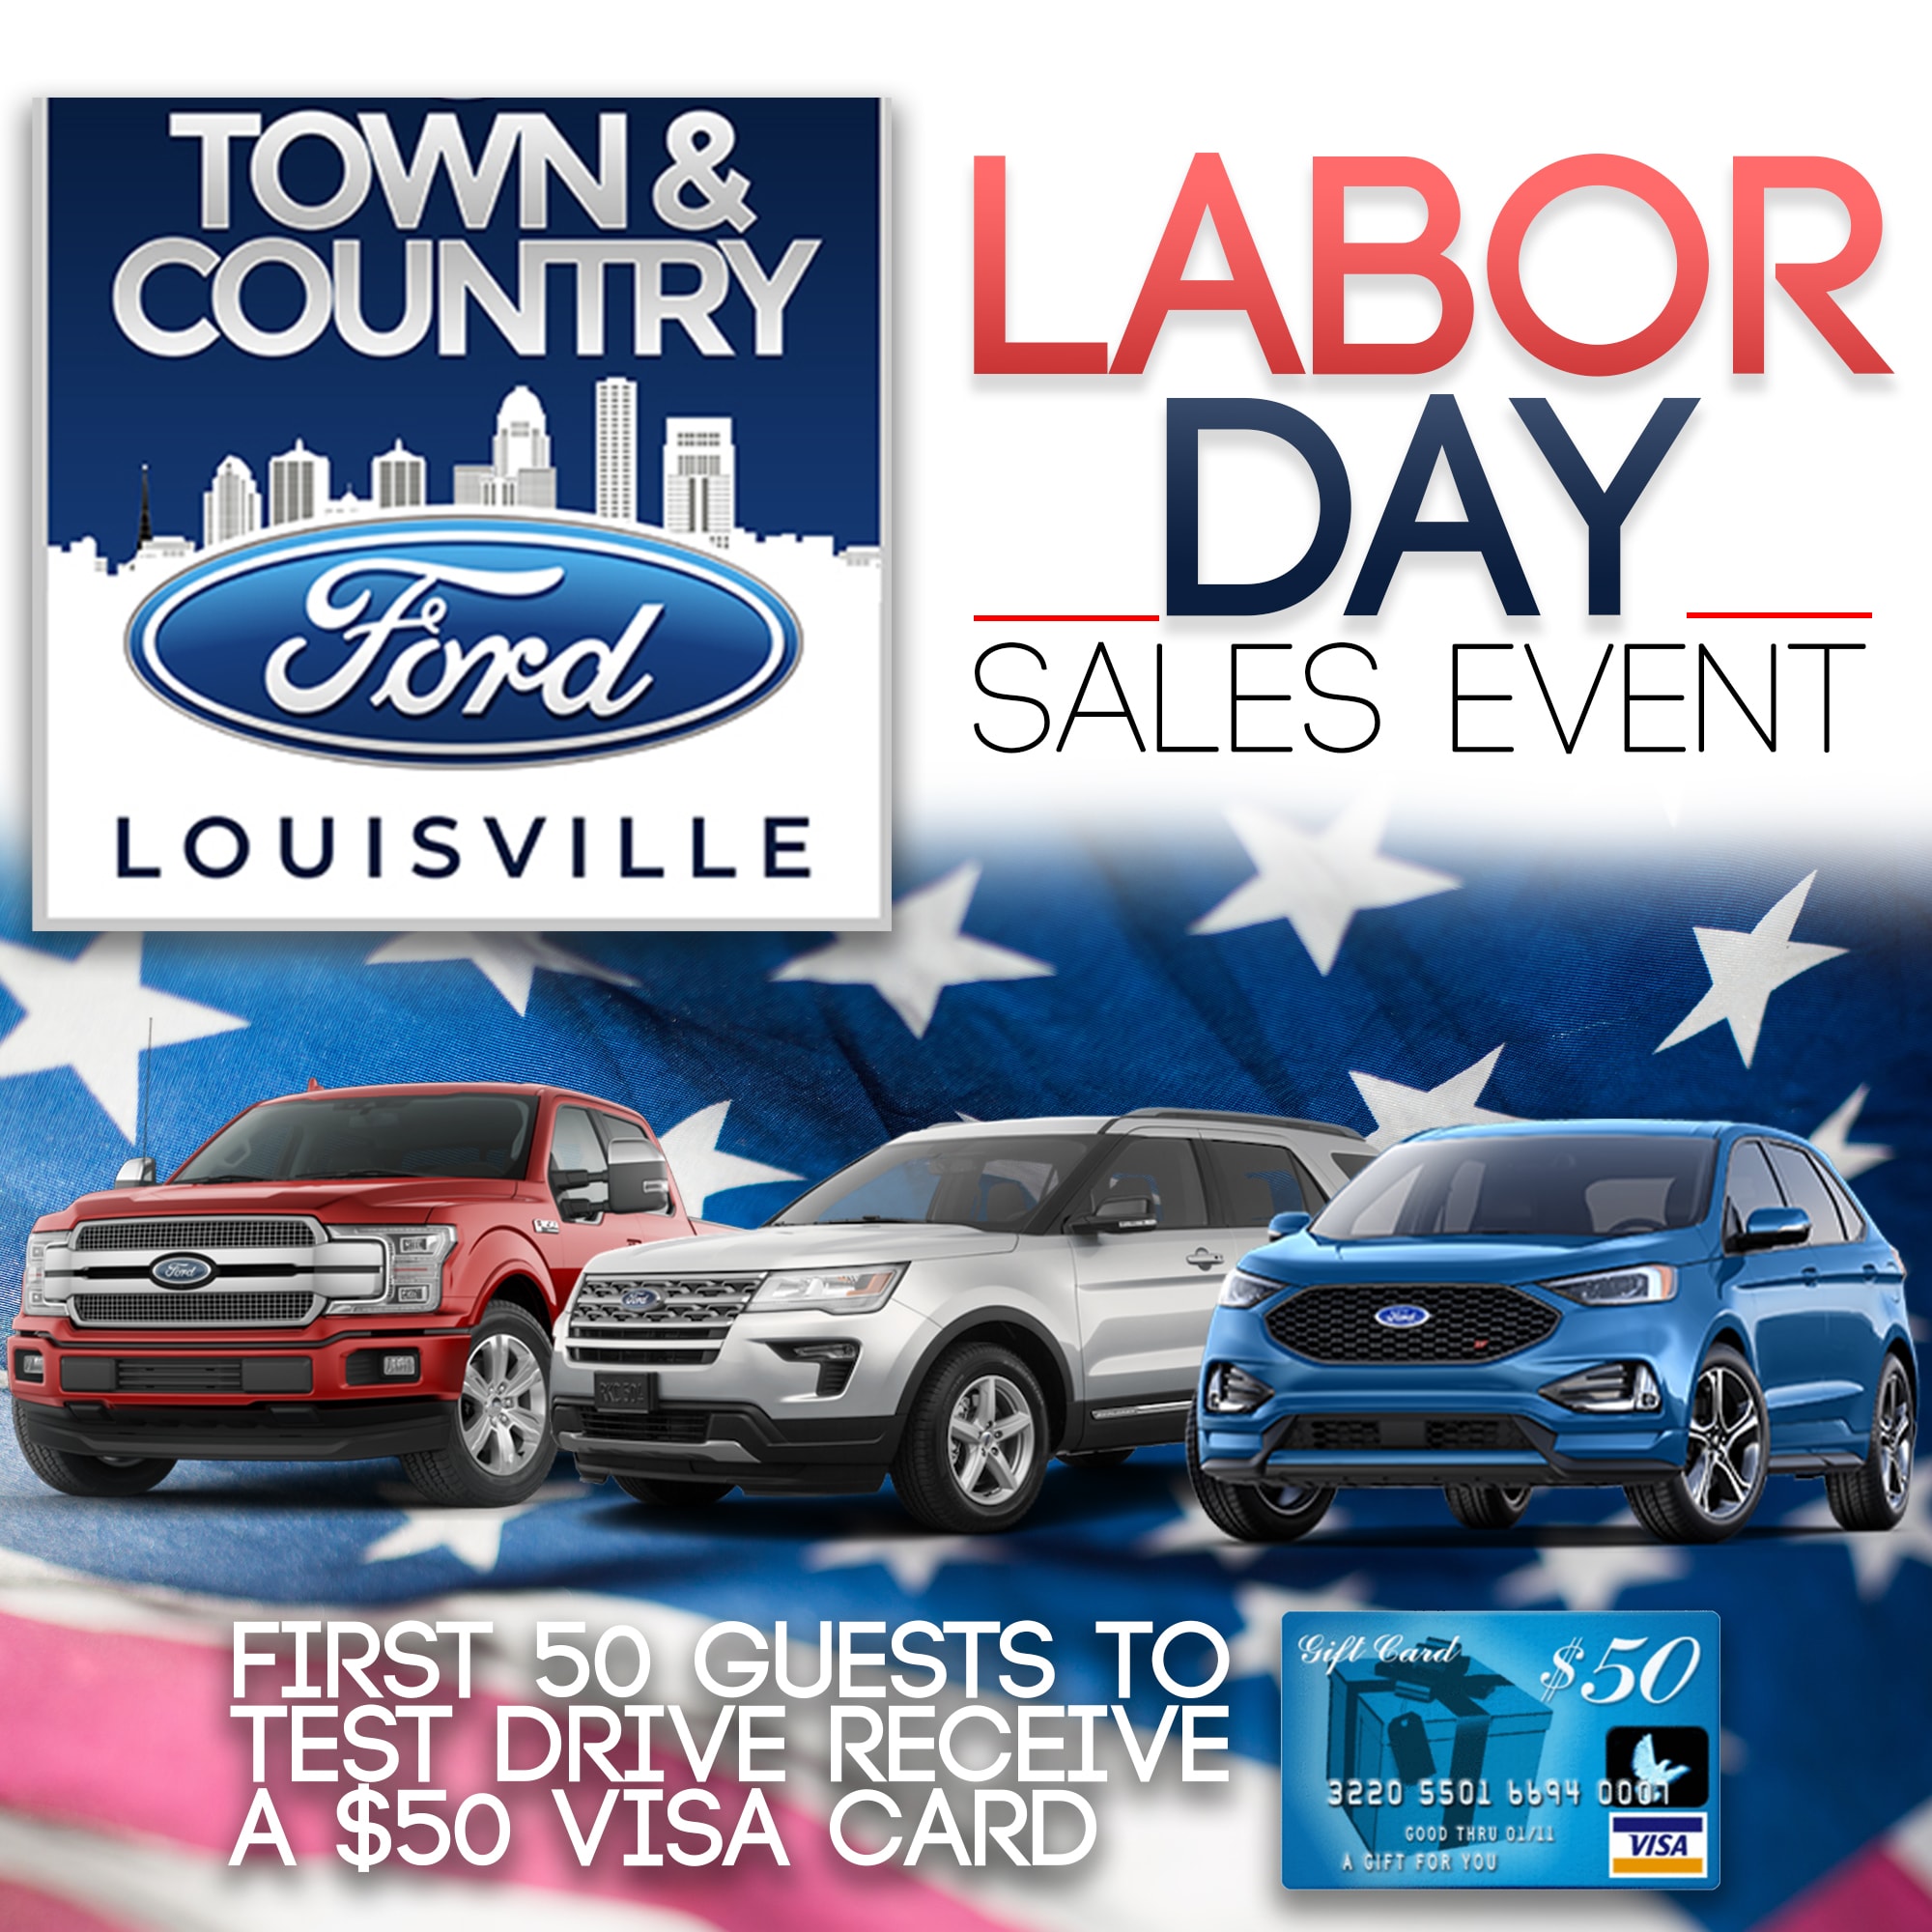 Labor Day Sales Event Town & Country Ford